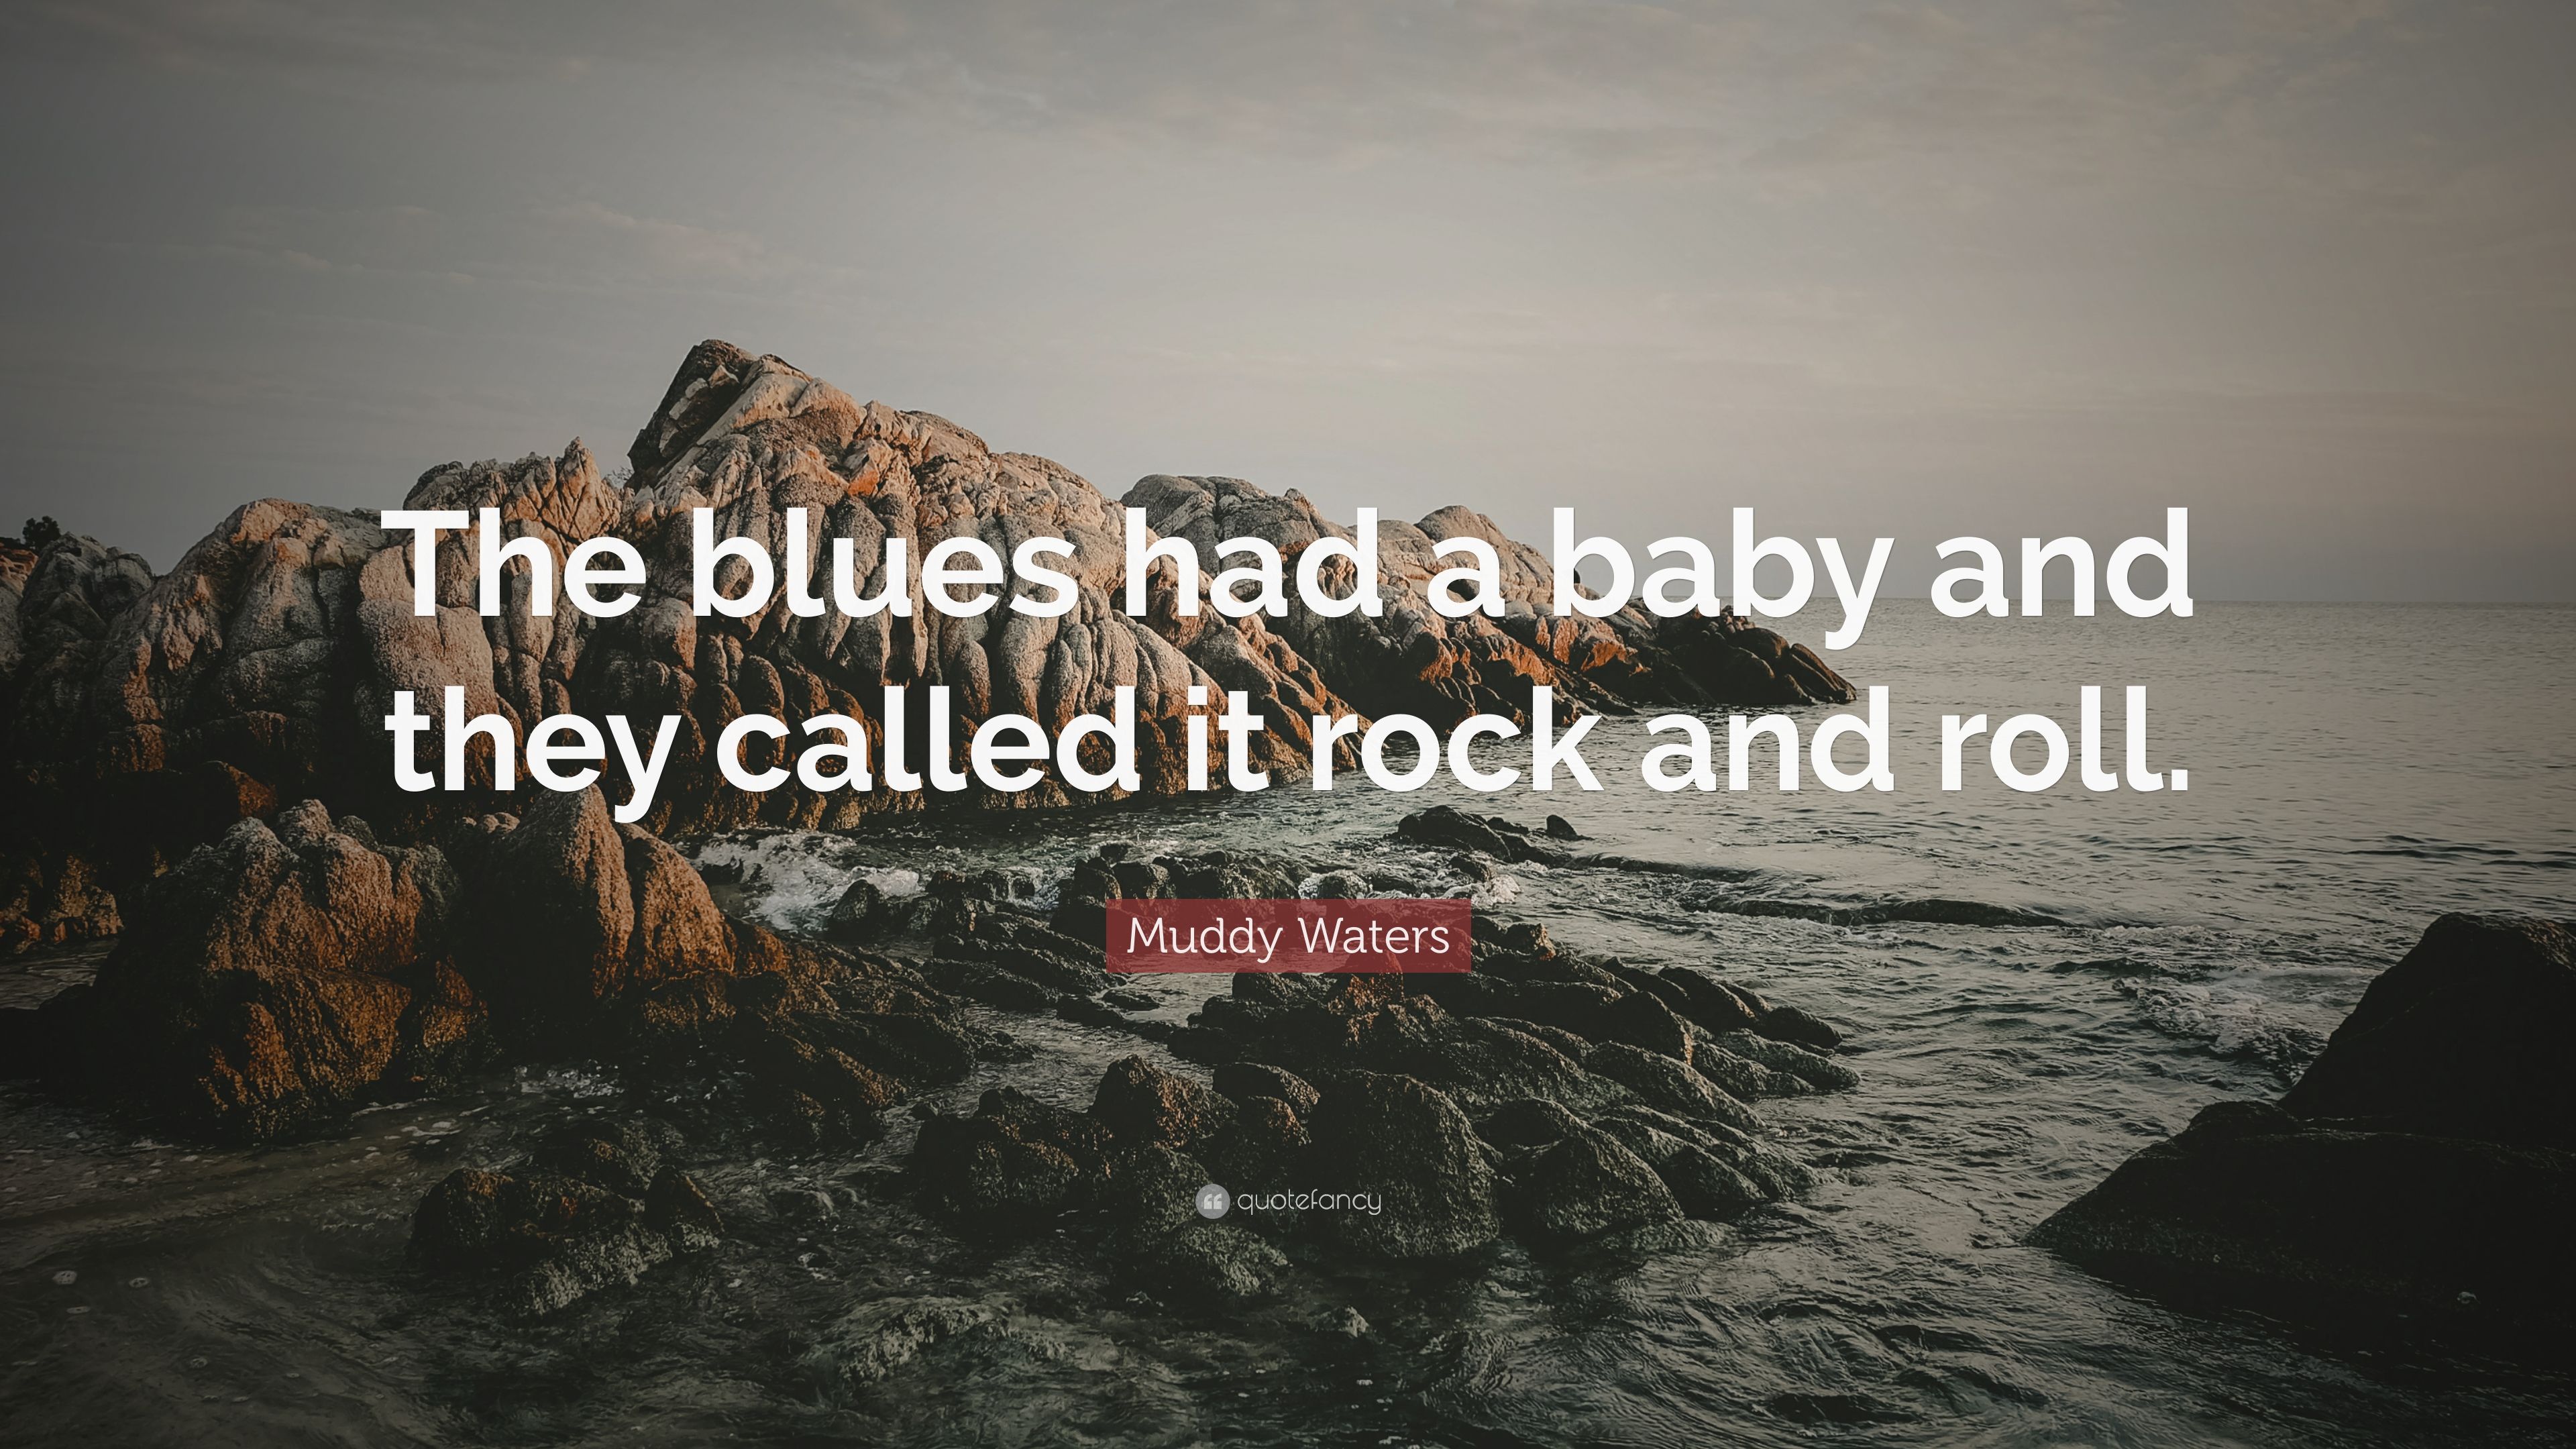 Muddy Waters Quote: “The blues had a .quotefancy.com